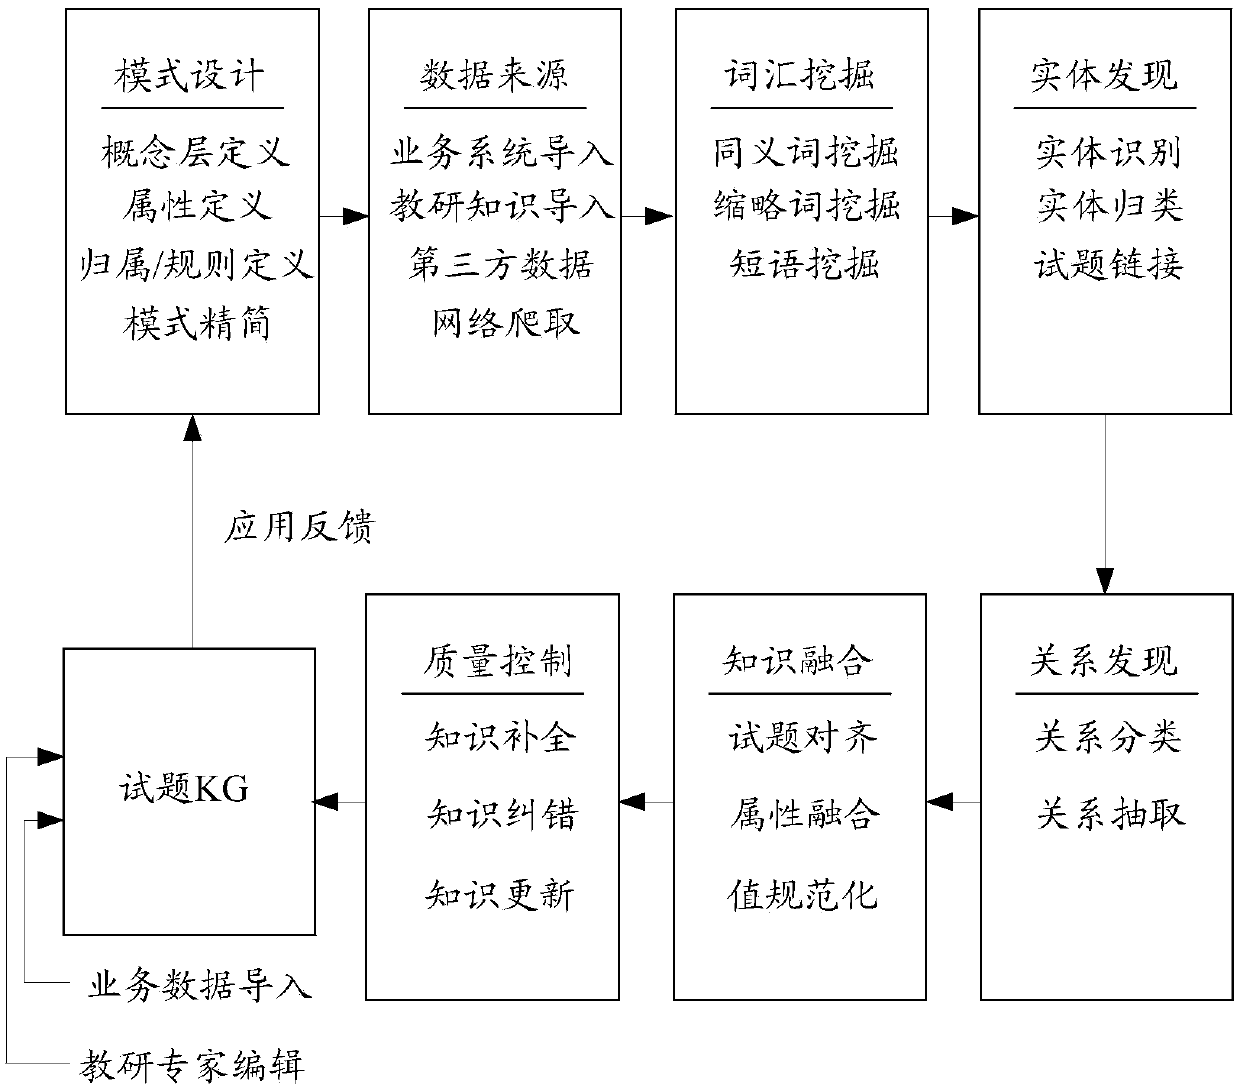 Data processing method based on knowledge map